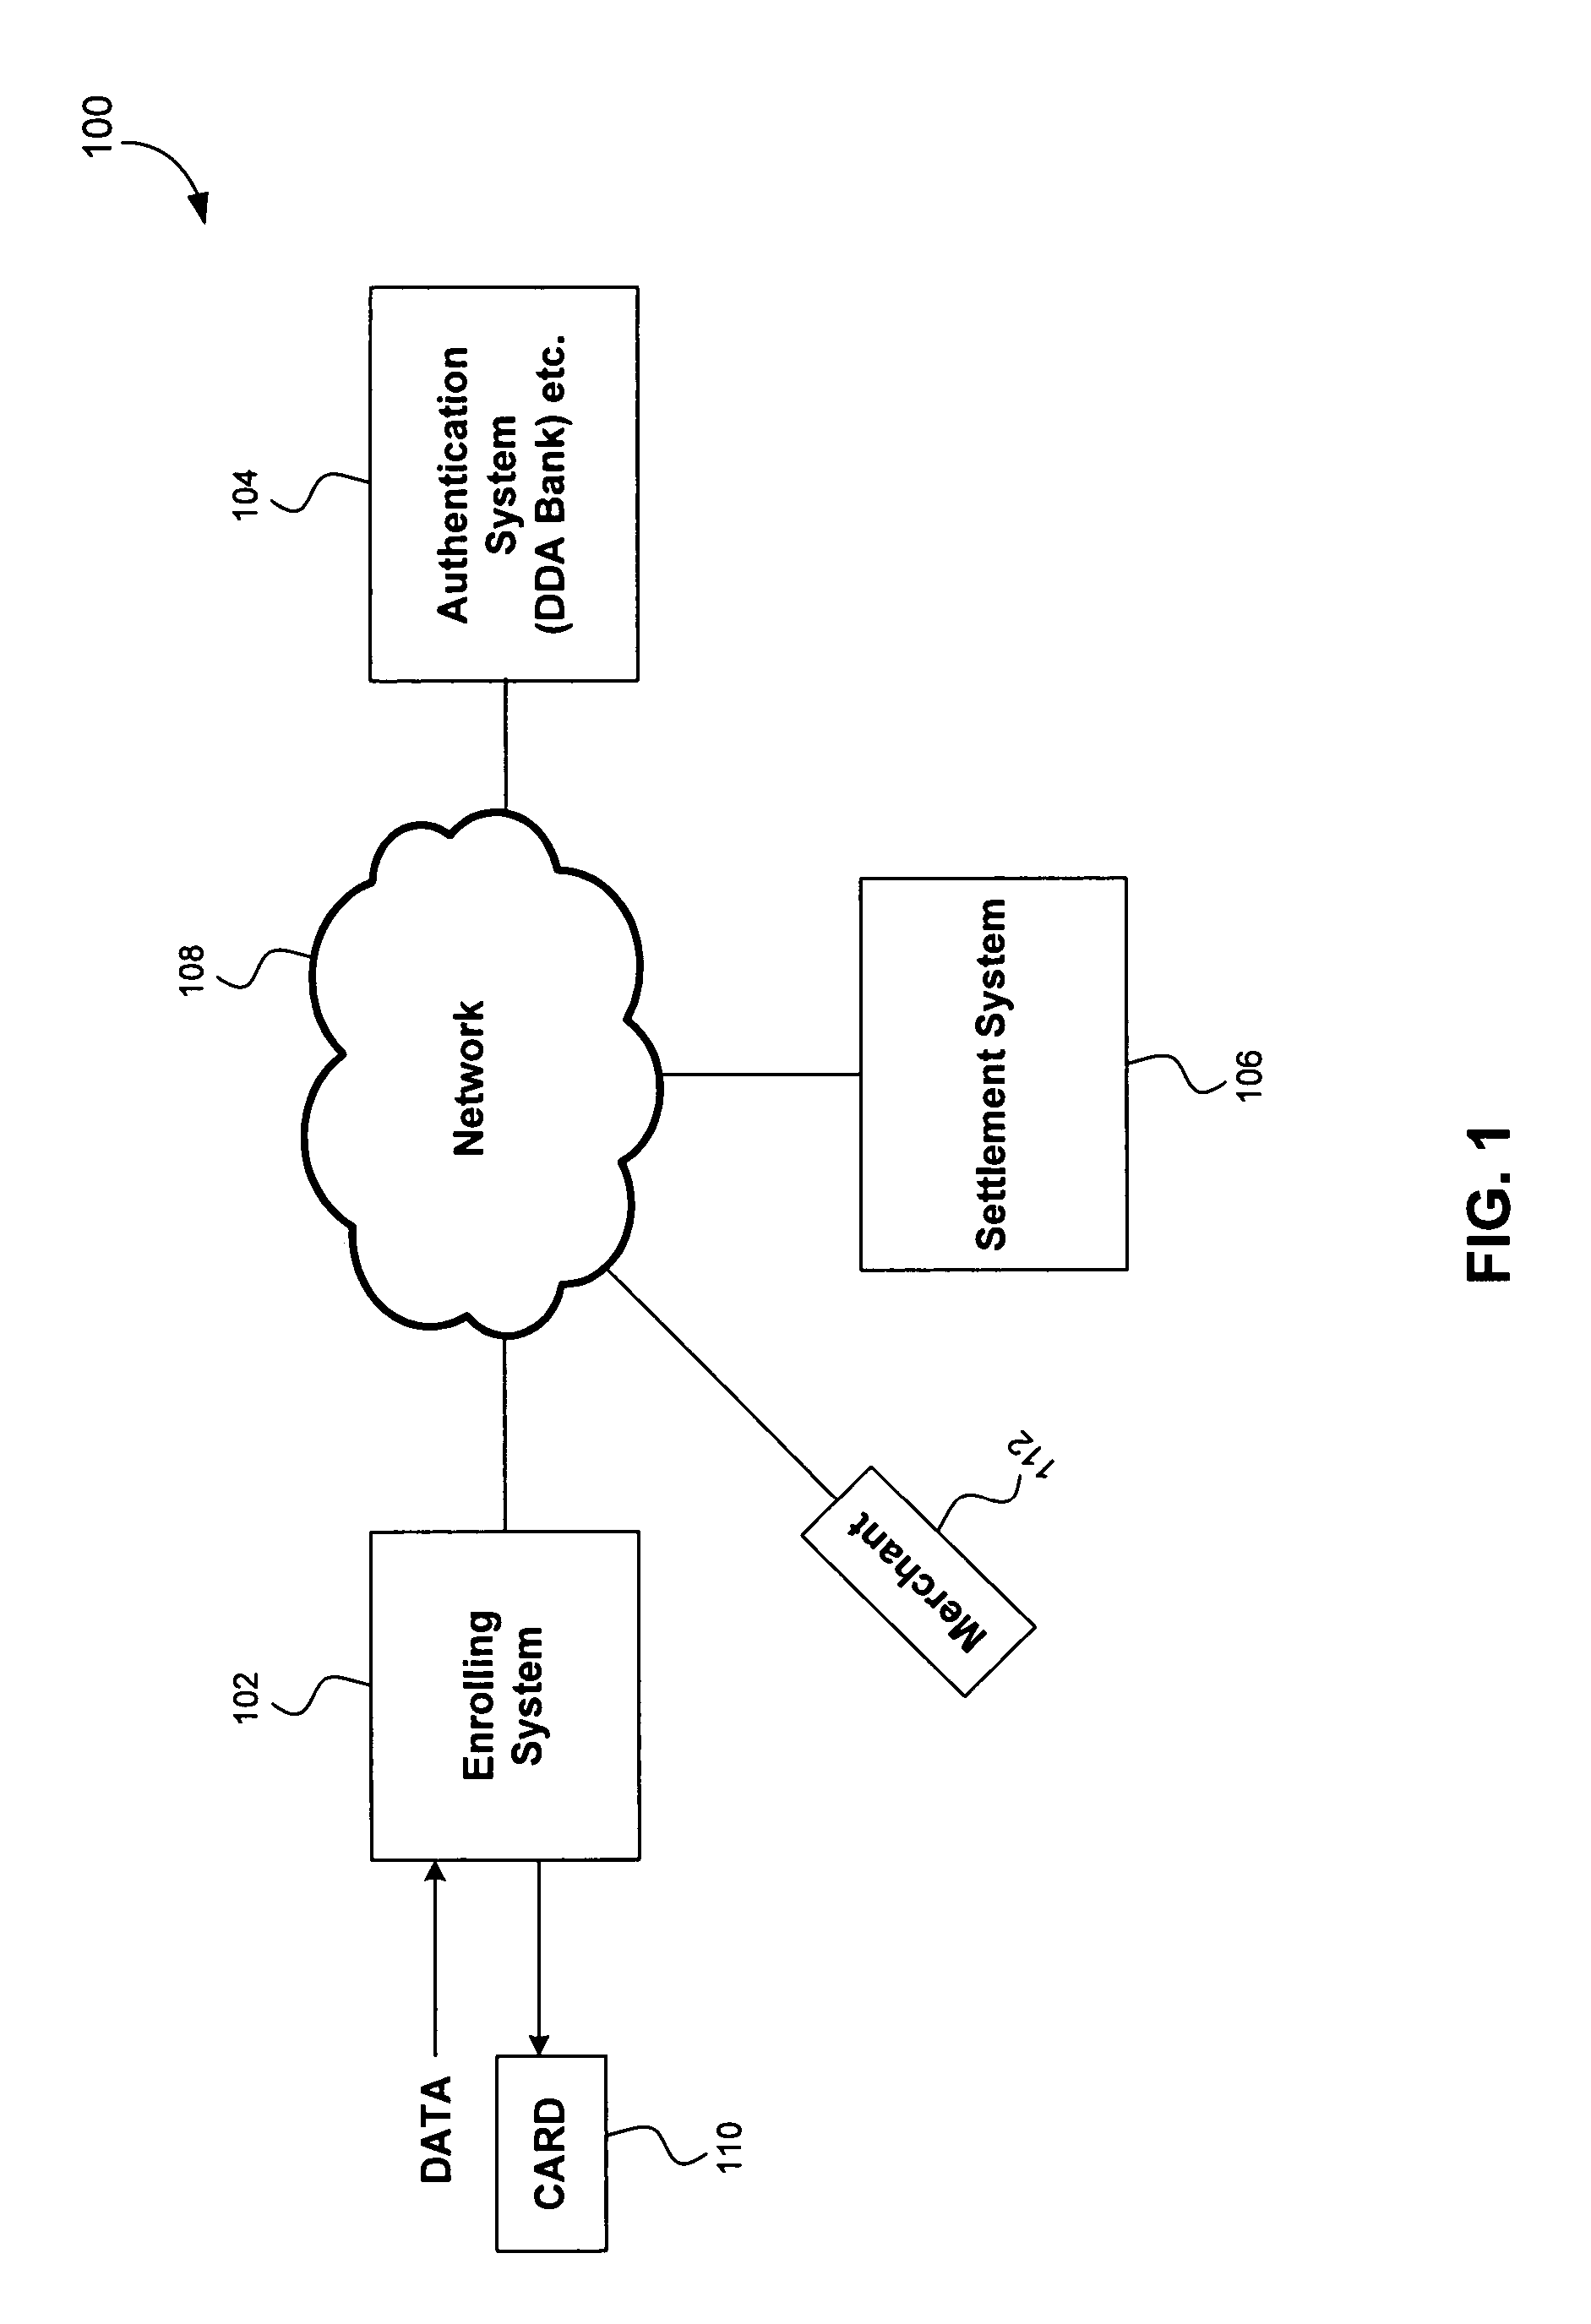 System, method, and computer program product for issuing and using debit cards